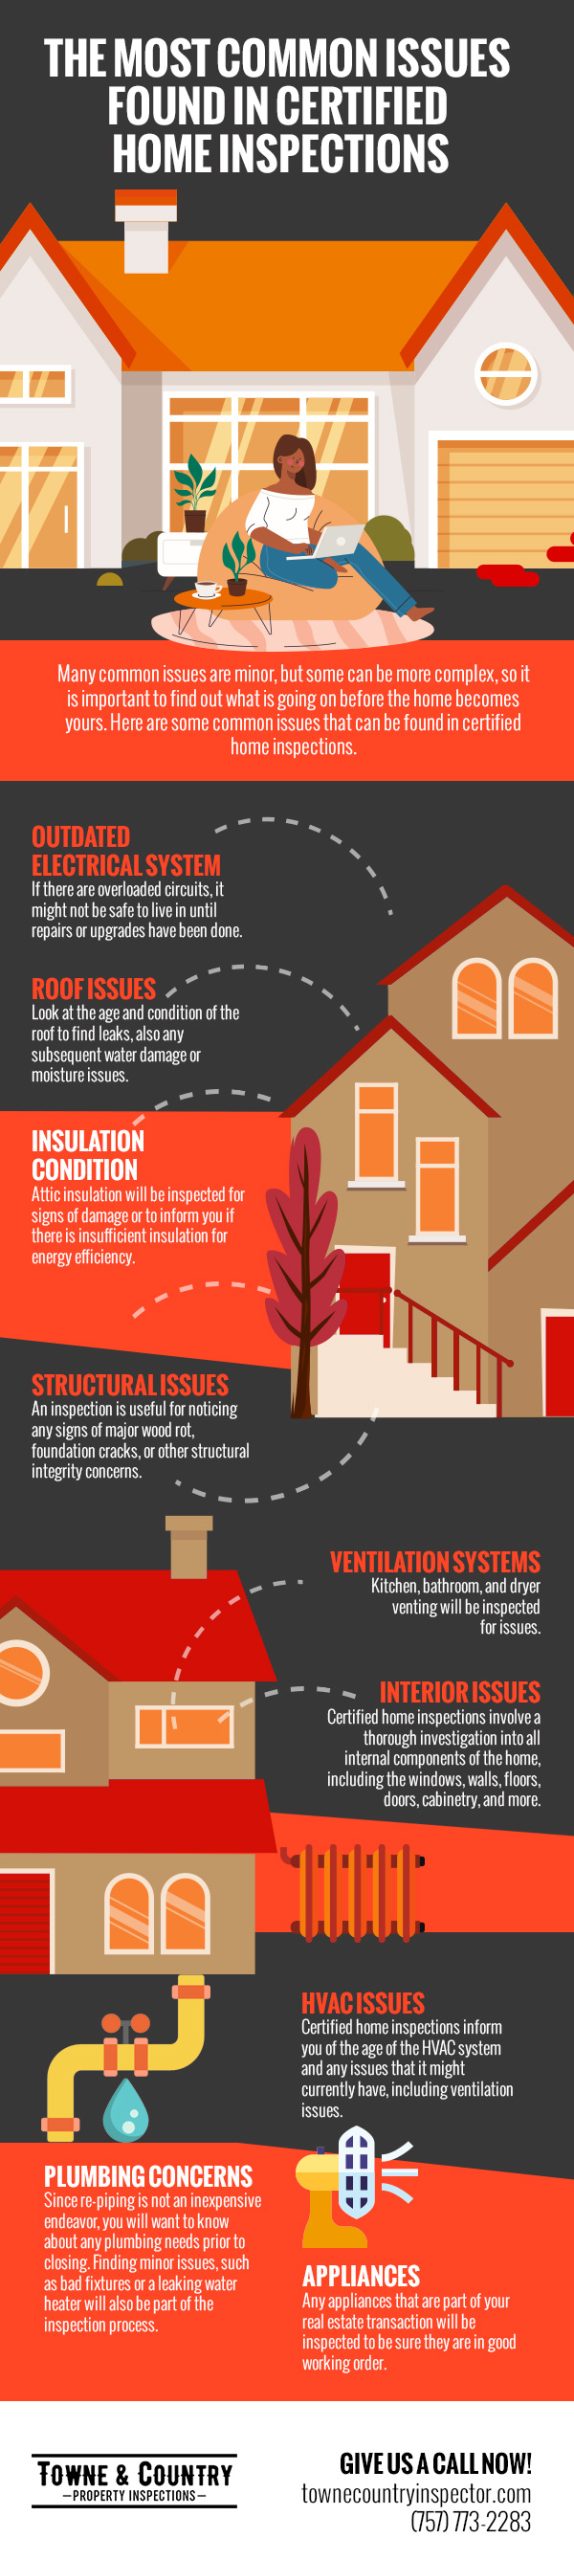 The Most Common Issues Found in Certified Home Inspections [infographic]